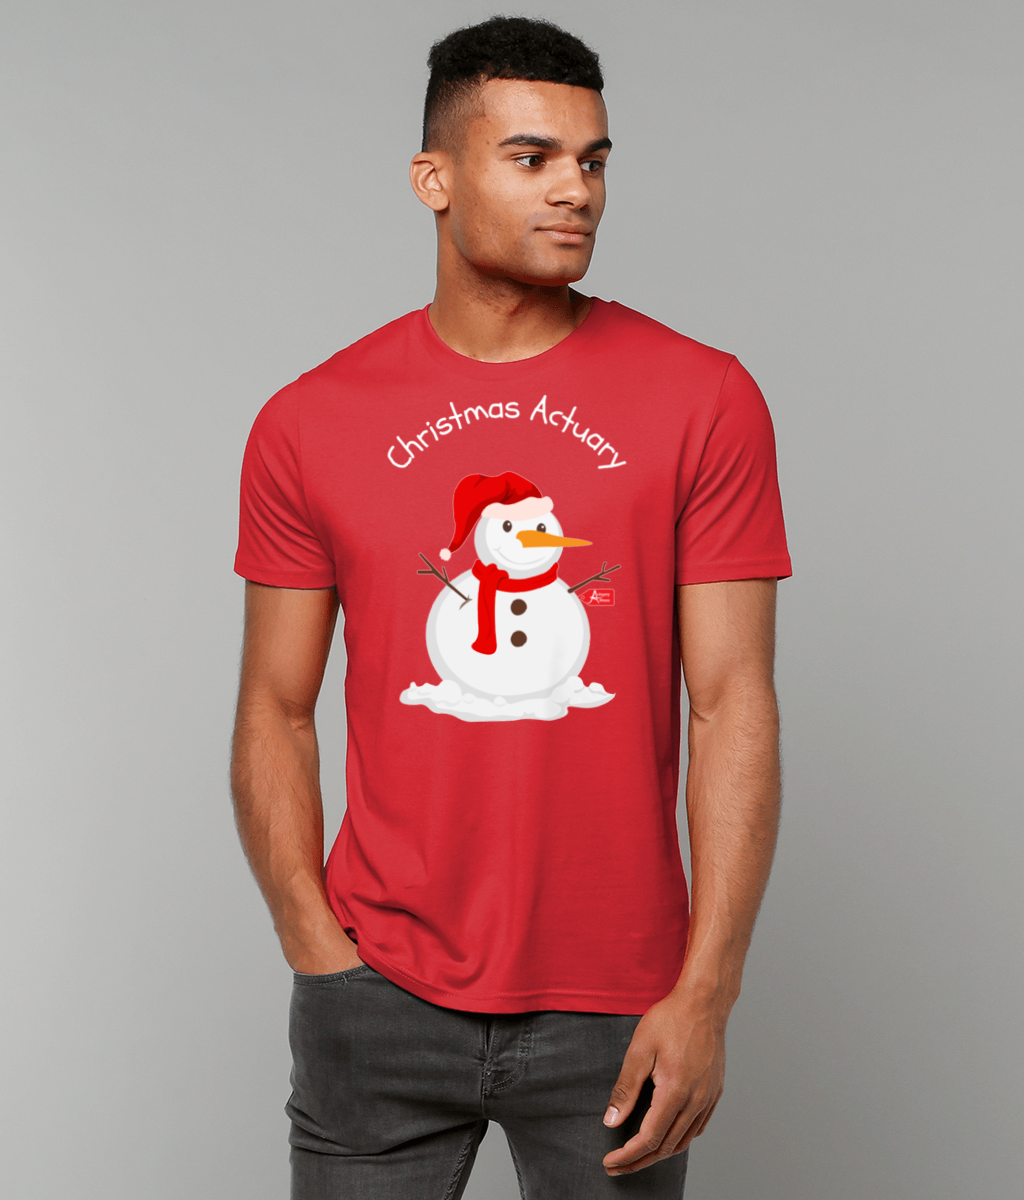 Christmas Actuary Snowman T-shirt (Red and Green Variations)